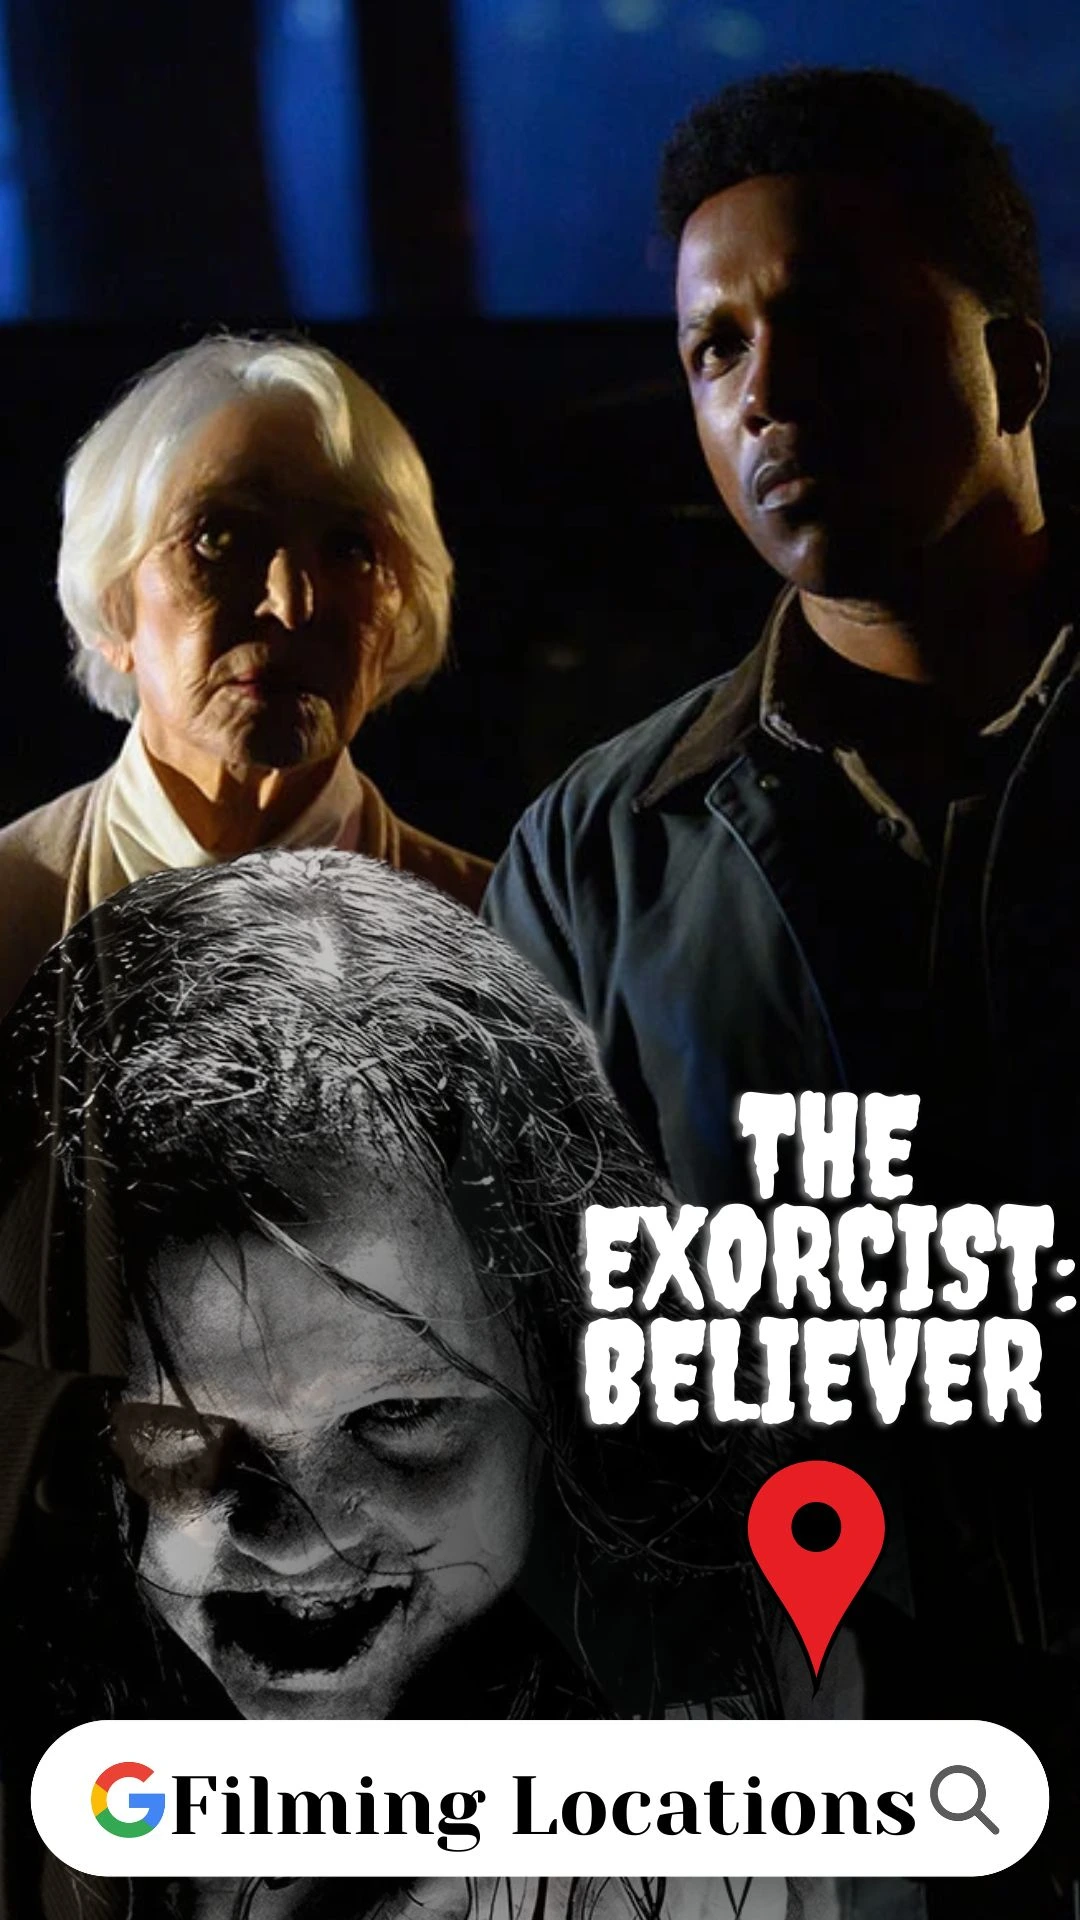 The Exorcist Believer Filming Locations